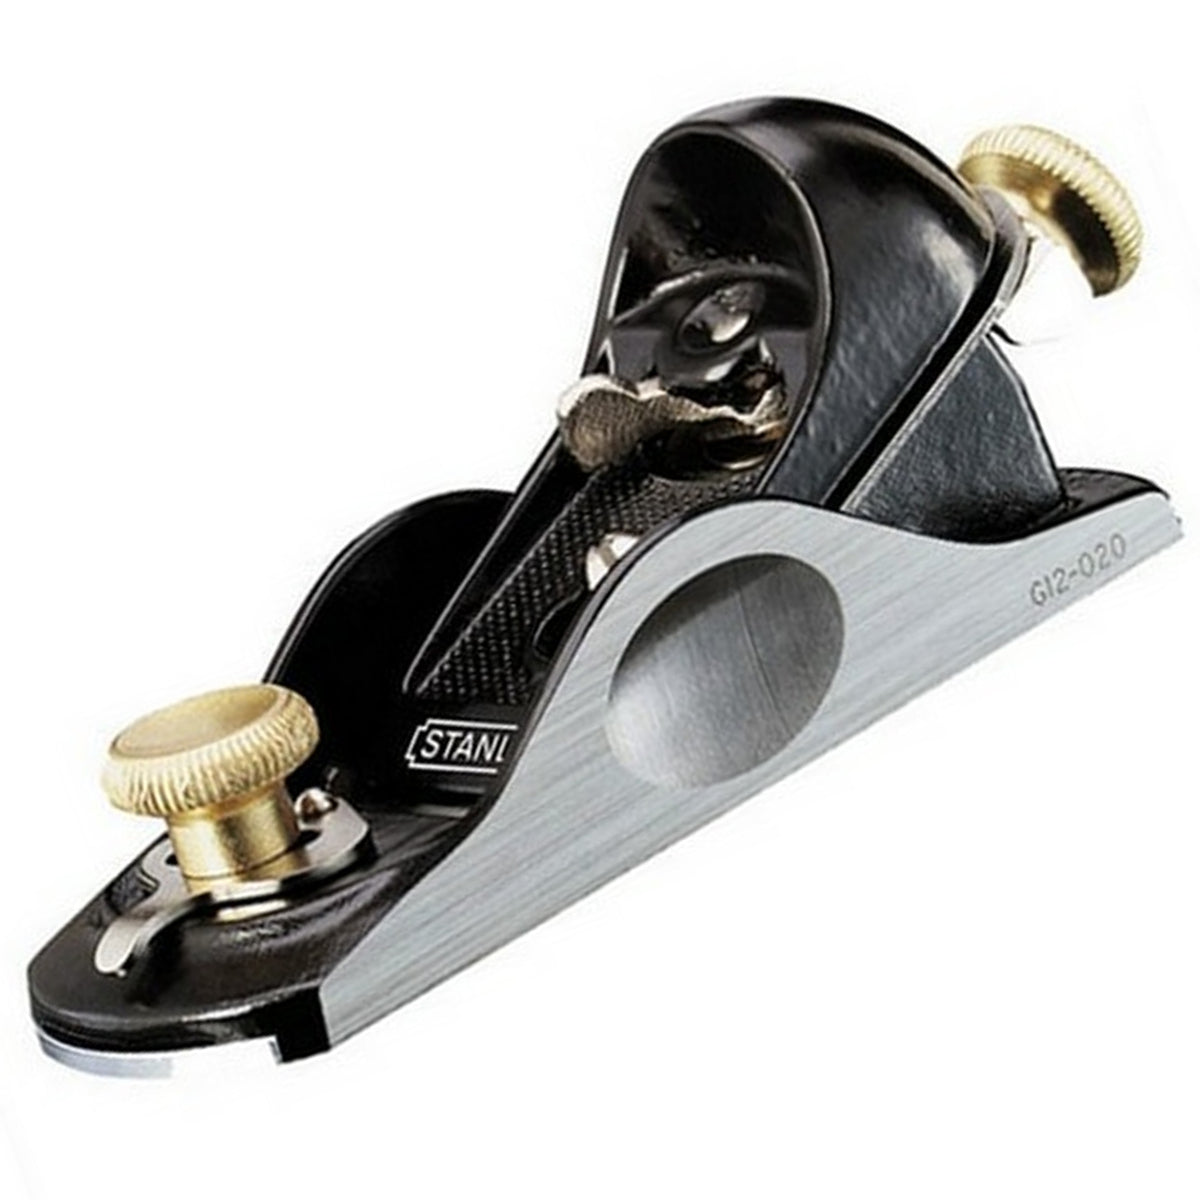 Stanley 9.1/2 Block Plane With Pouch STA512020